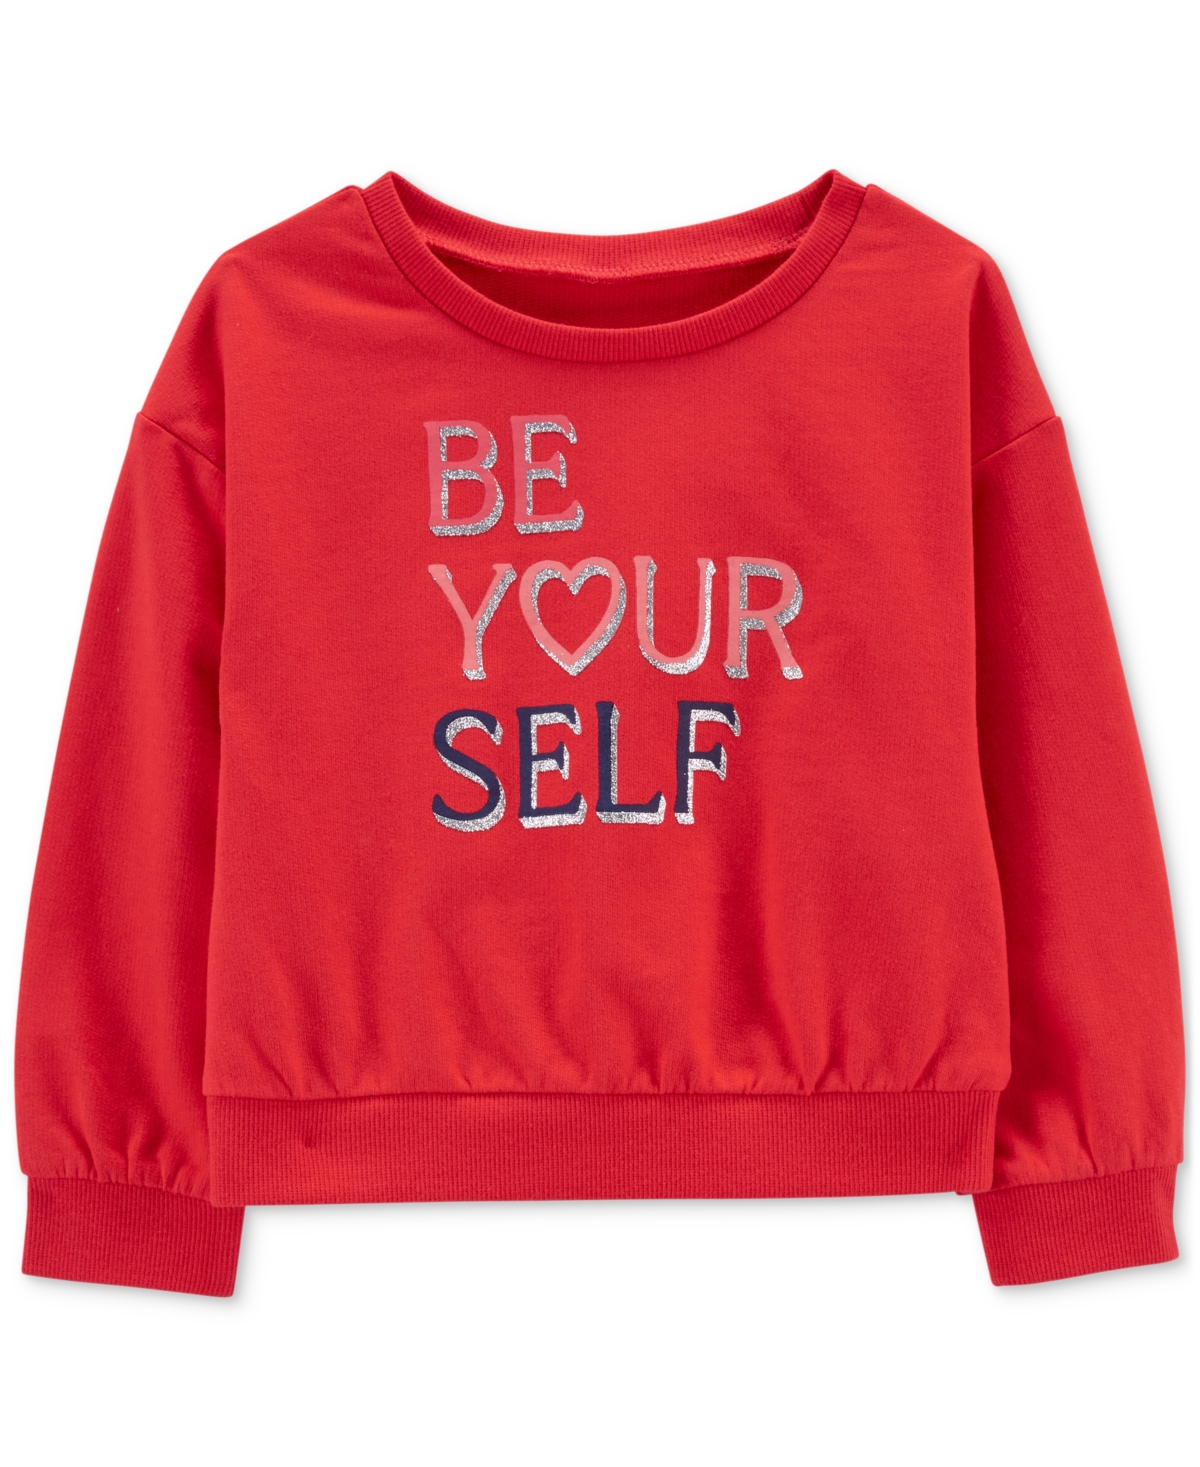 Carter's Kids' Toddler Girls 'be Yourself' Graphic Top In Red